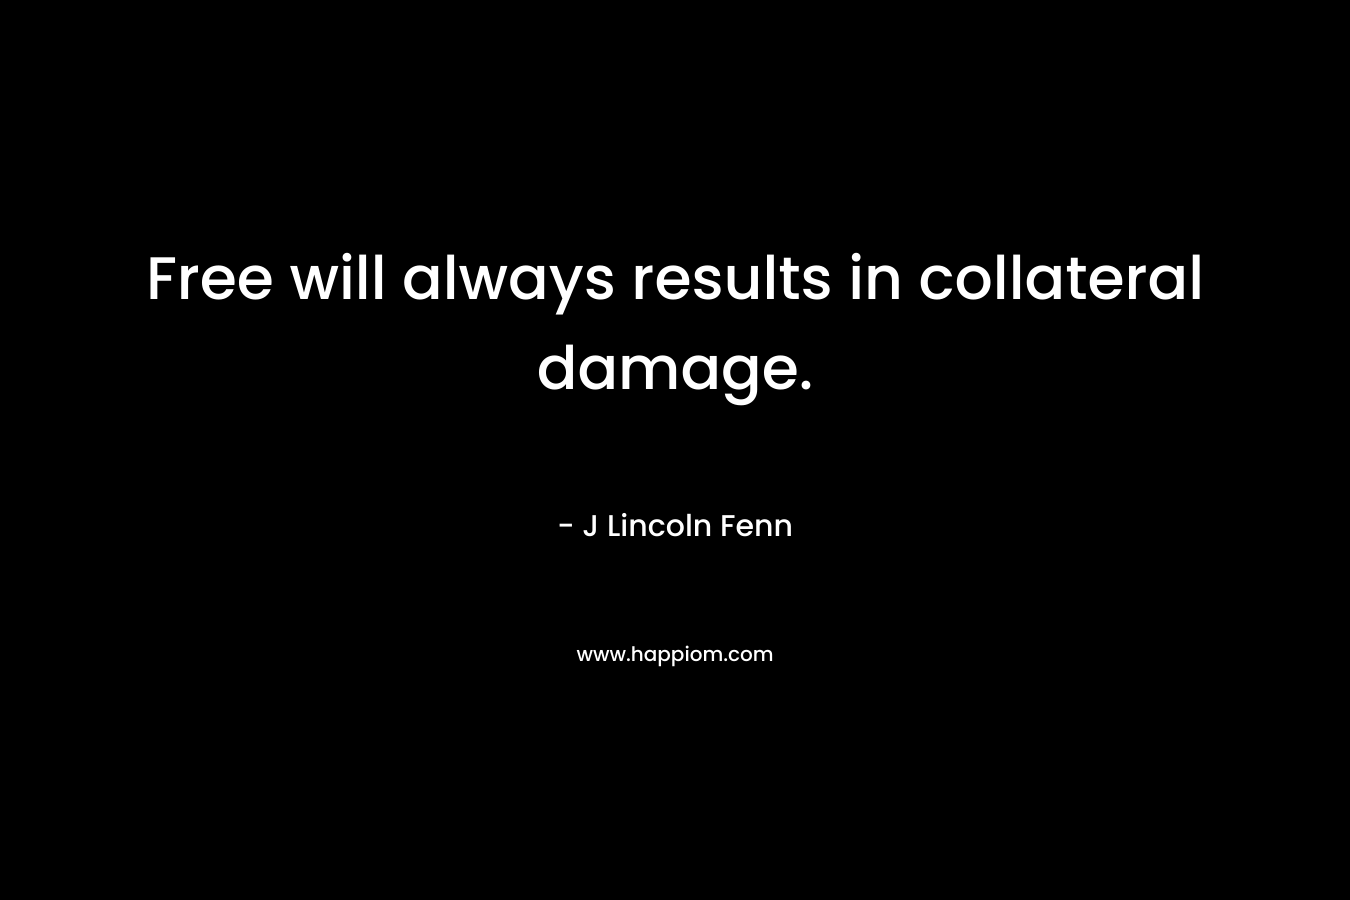 Free will always results in collateral damage. – J Lincoln Fenn